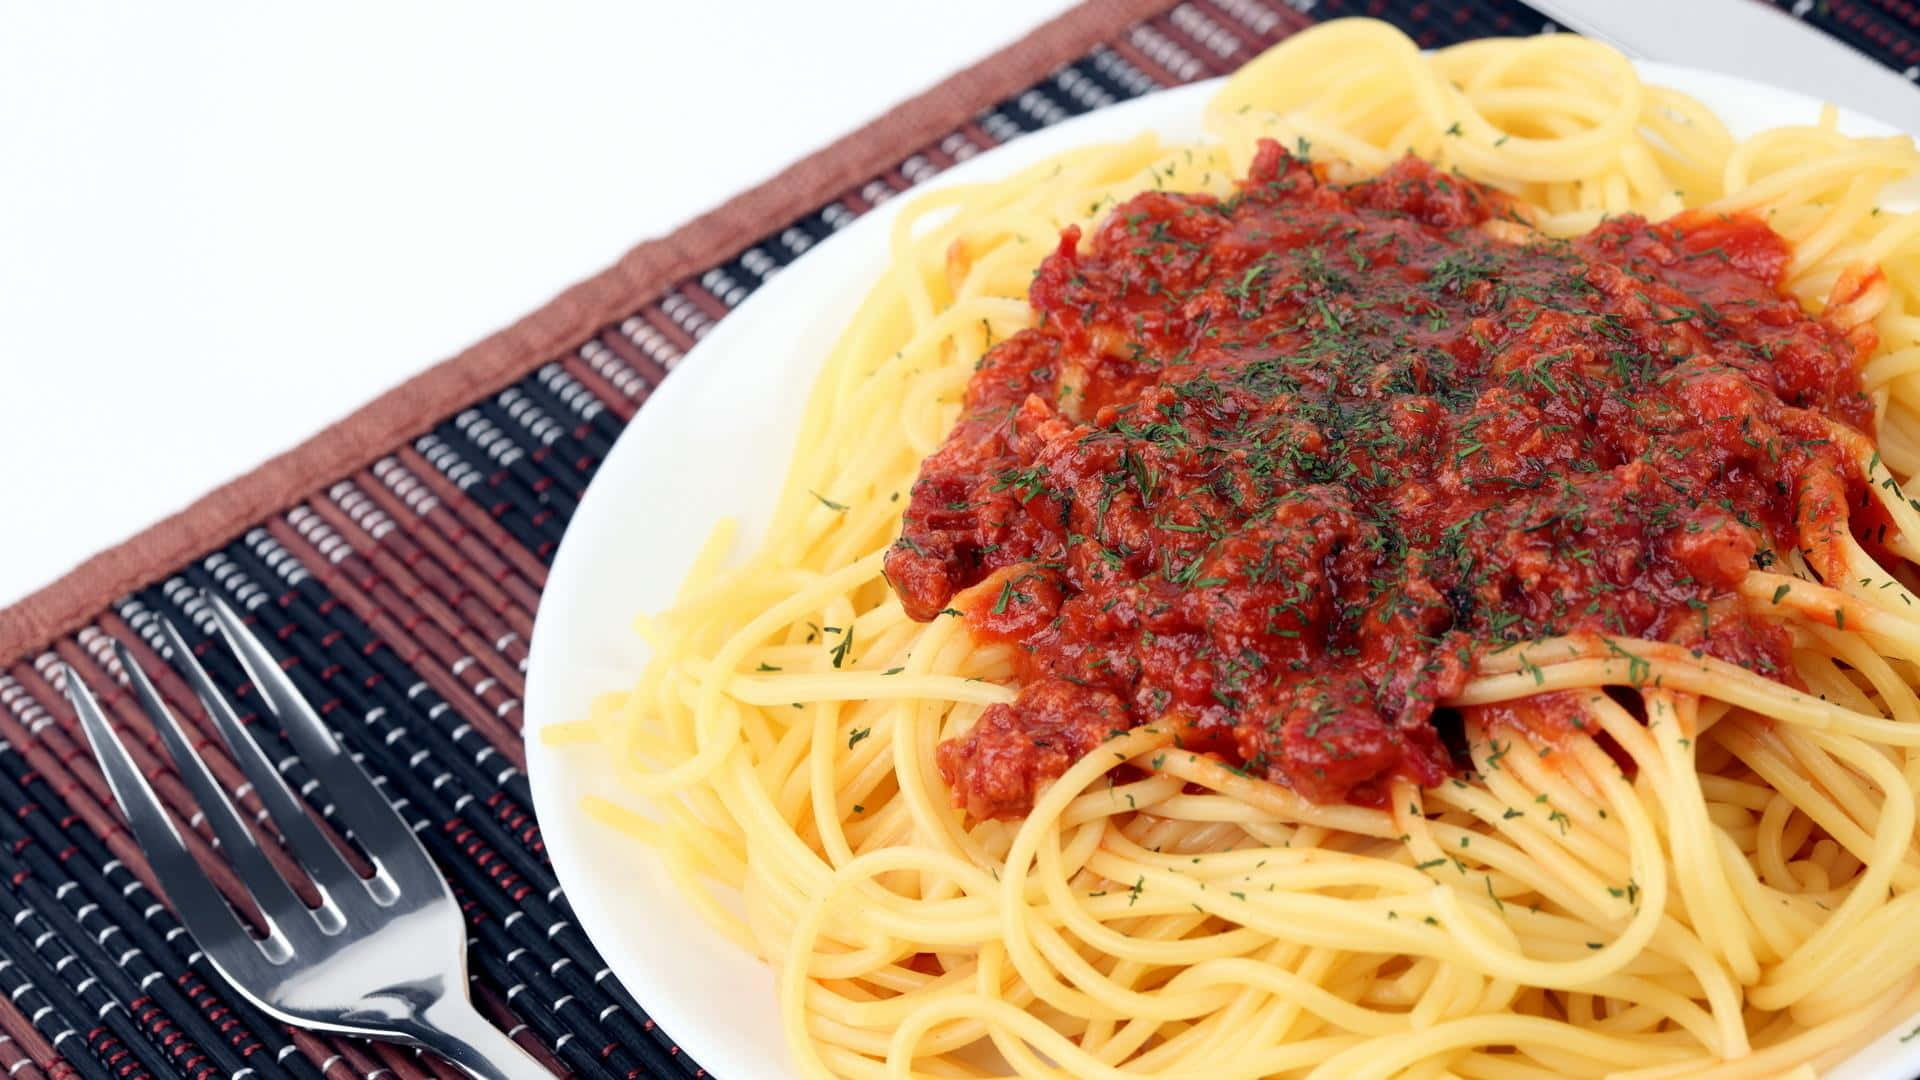 Spaghetti With Sauce On A Plate